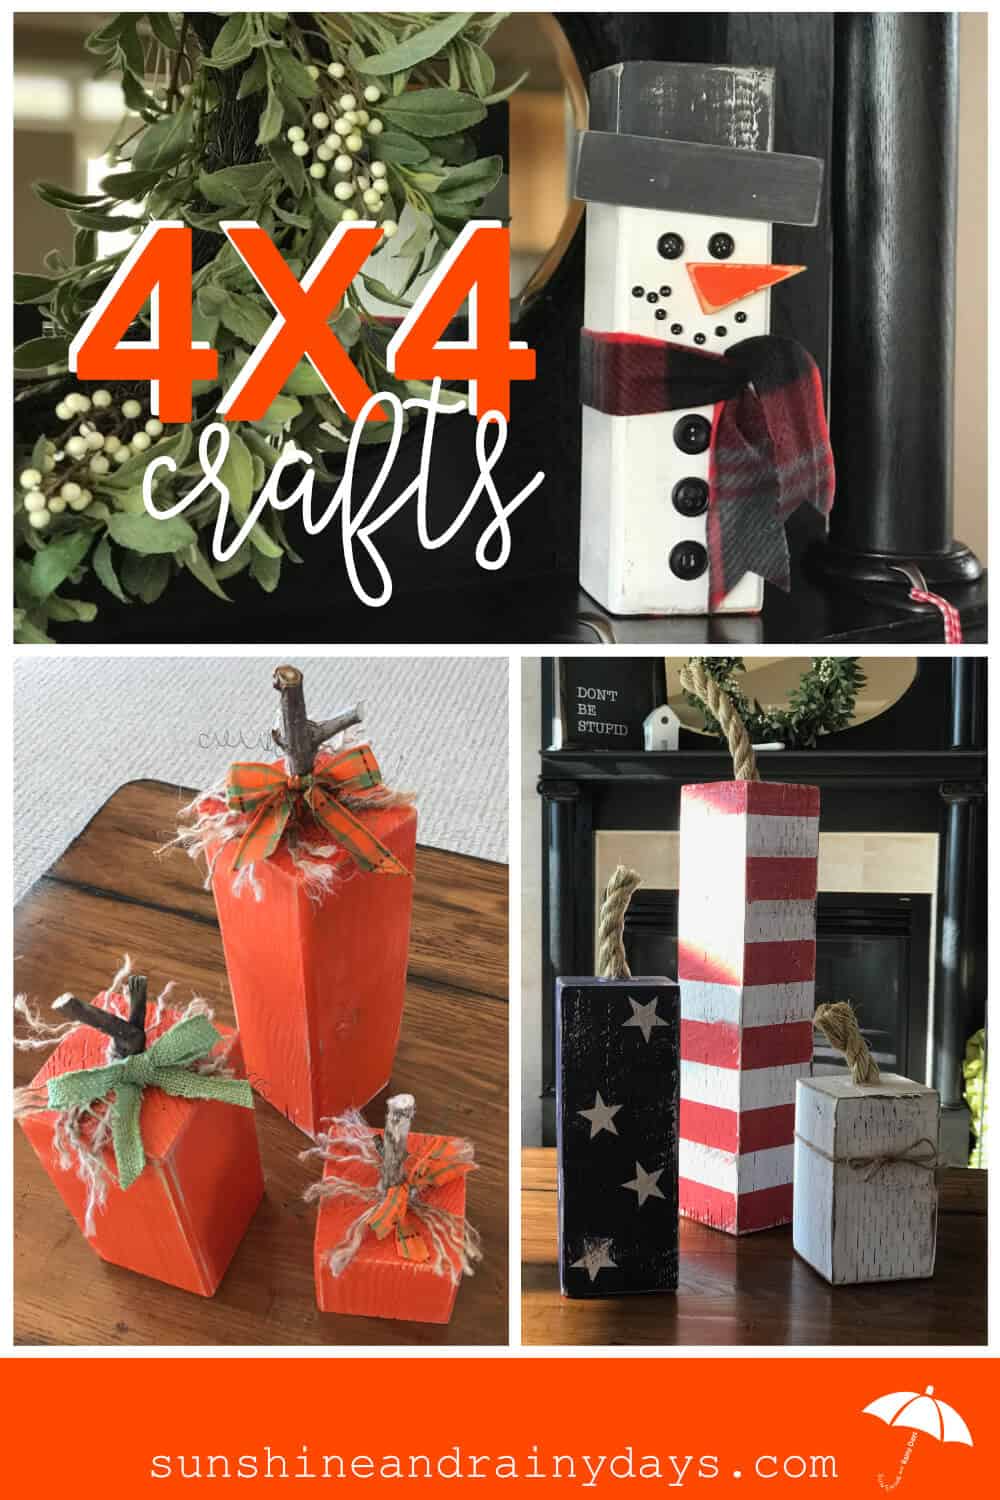 Who knew a 4 X 4 could hold so many possibilities? A quick search on Pinterest will give you hundreds of ideas on 4X4 Wood Crafts! From furniture to decor, 4 X 4's are super fun to work with! Here, we share the 4X4 Wood Crafts we have created and made ourselves!